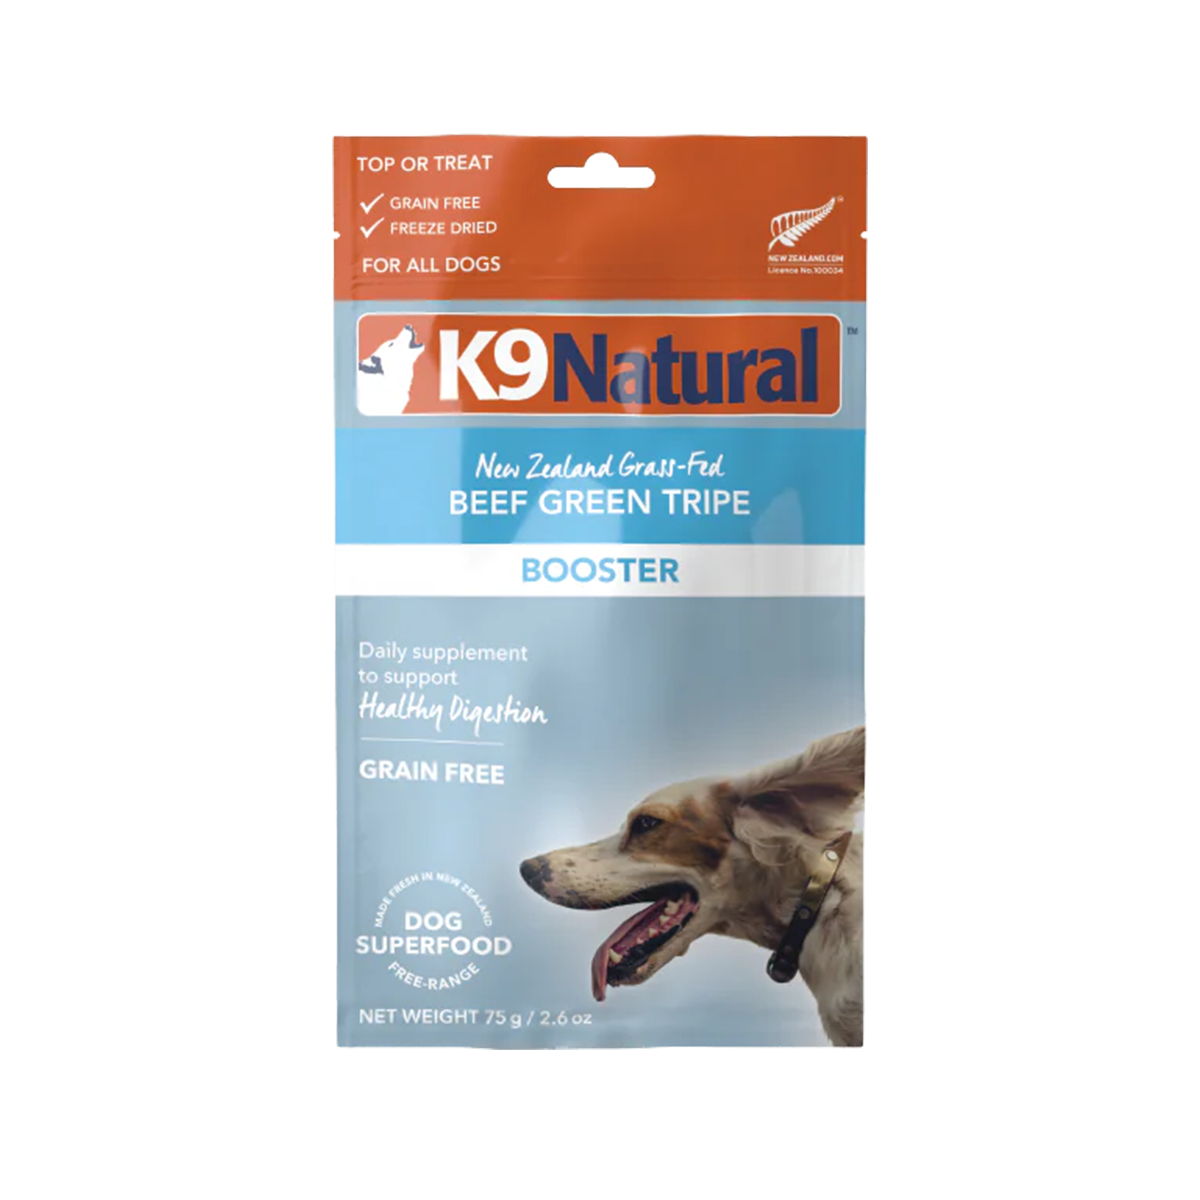 K9 Natural Freeze-Dried Dog Food Booster - Beef Green Tripe